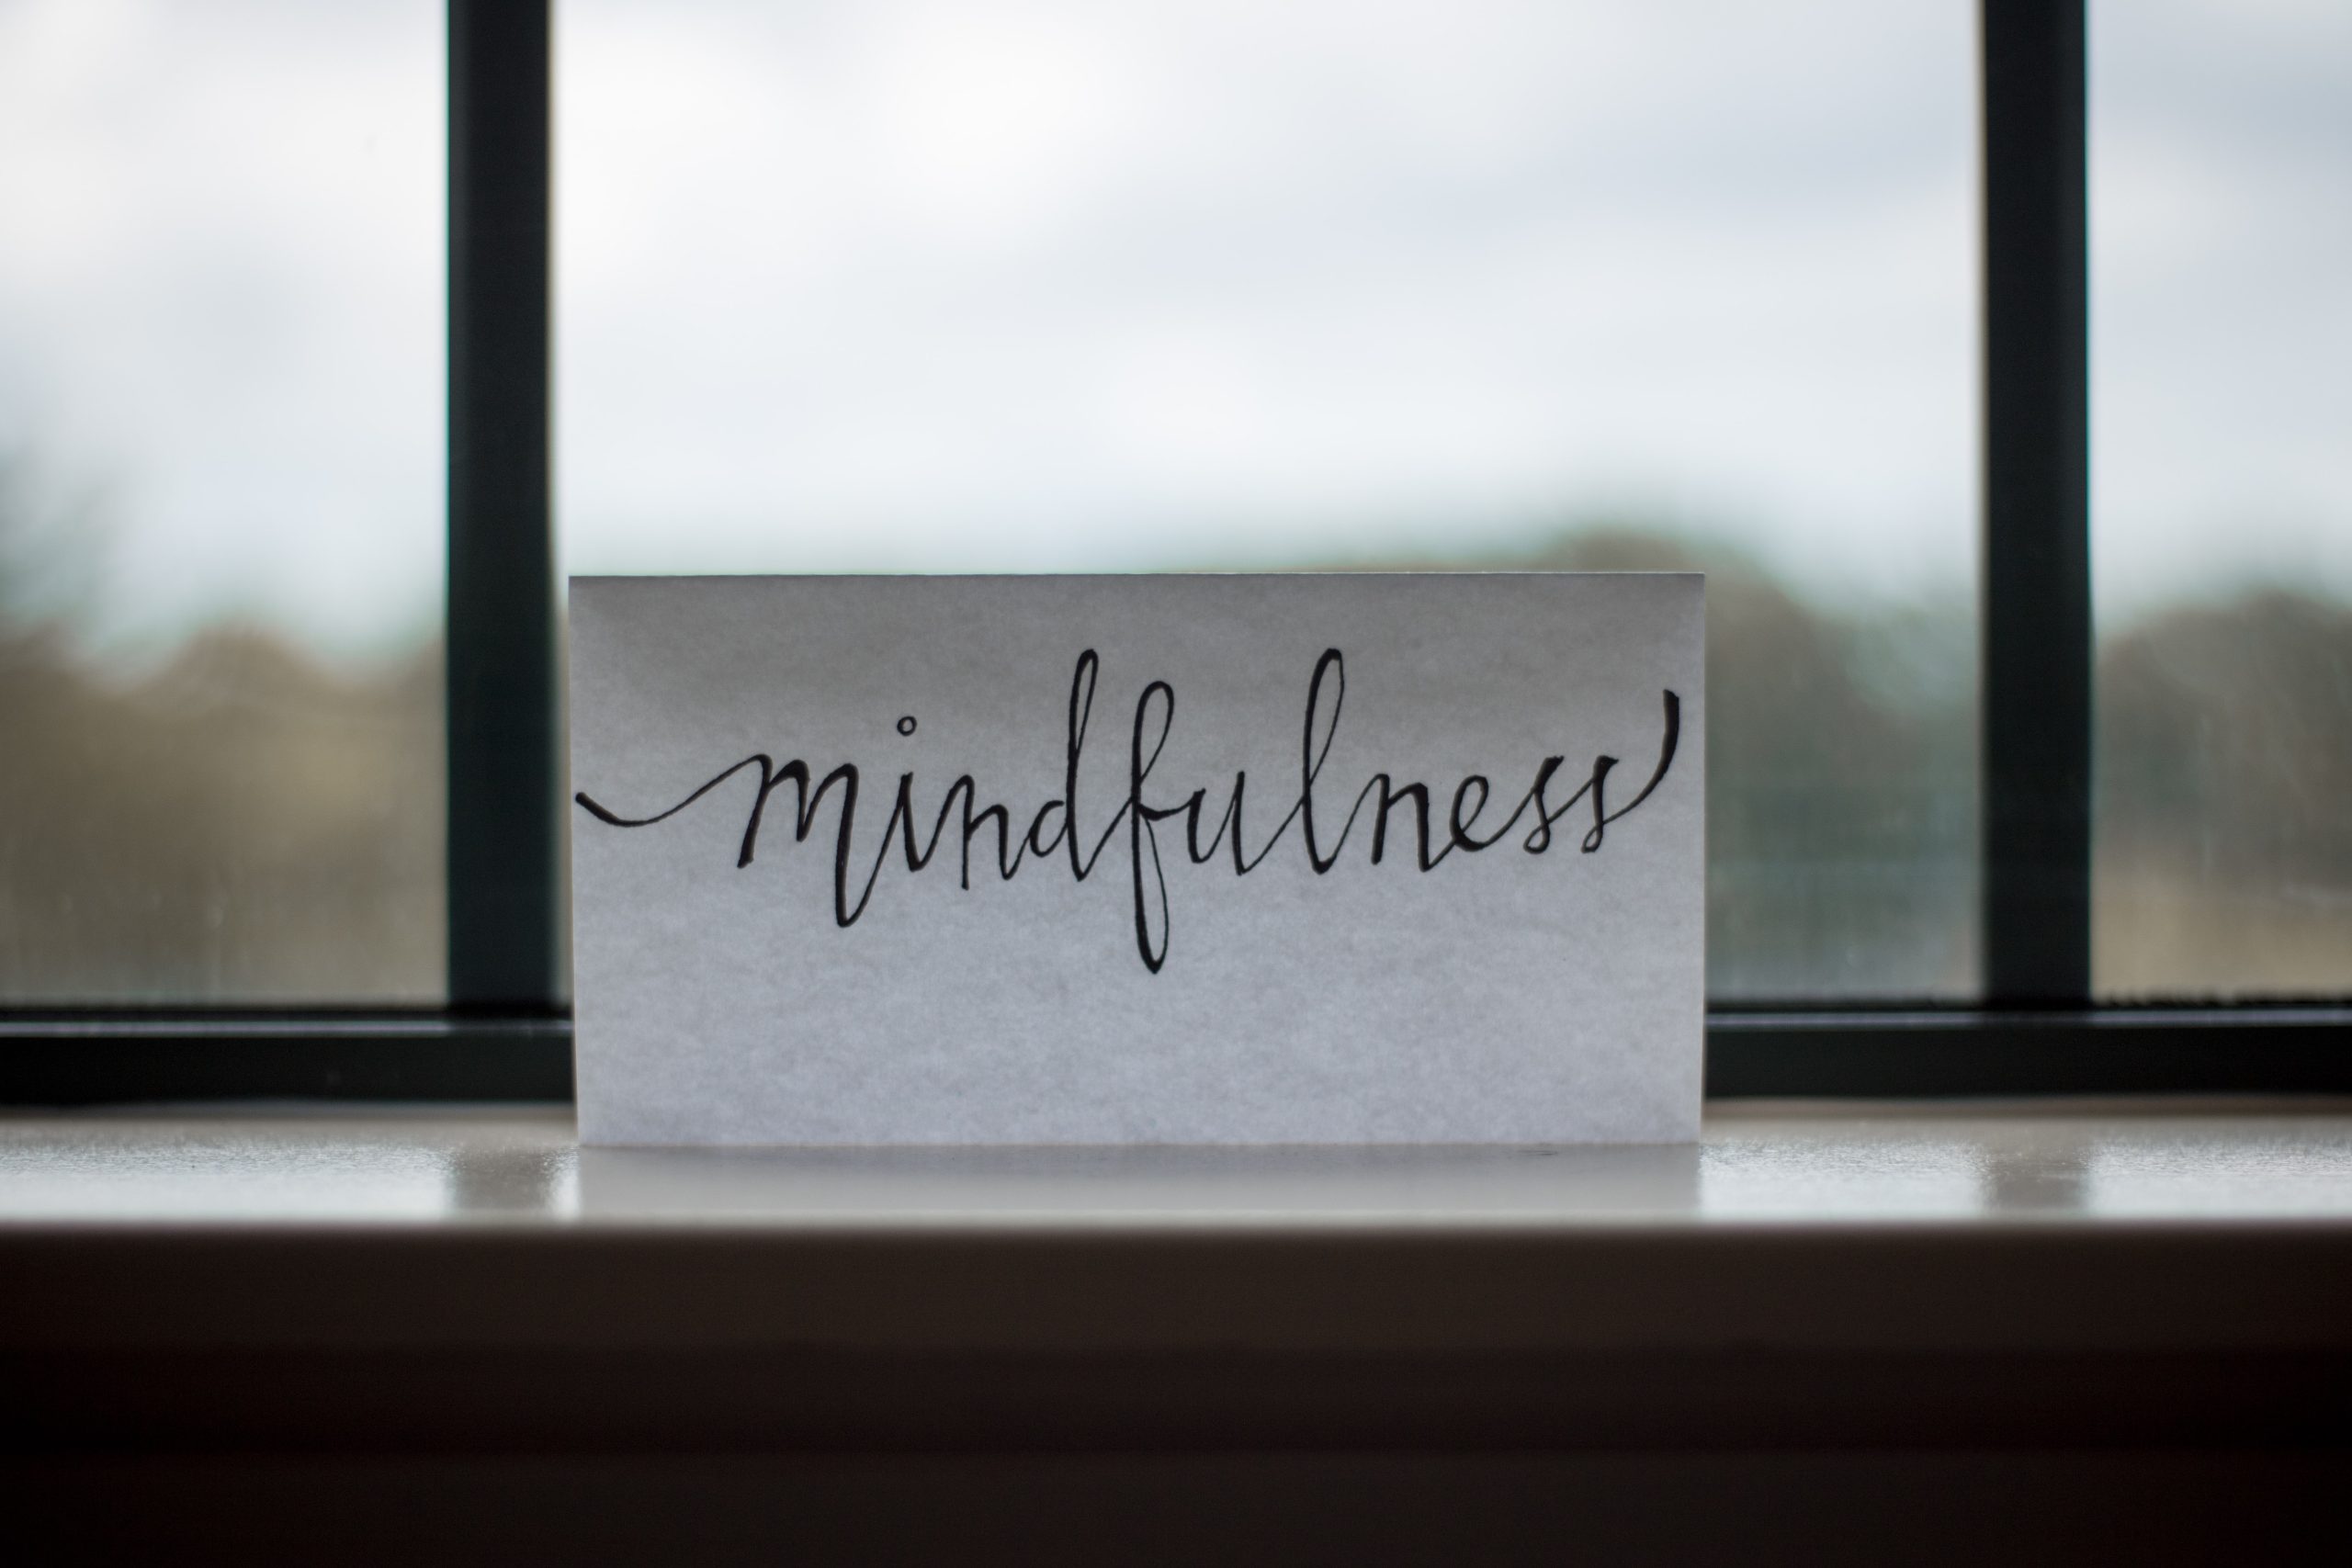 S3 Episode 6: Relationship with Mindfulness